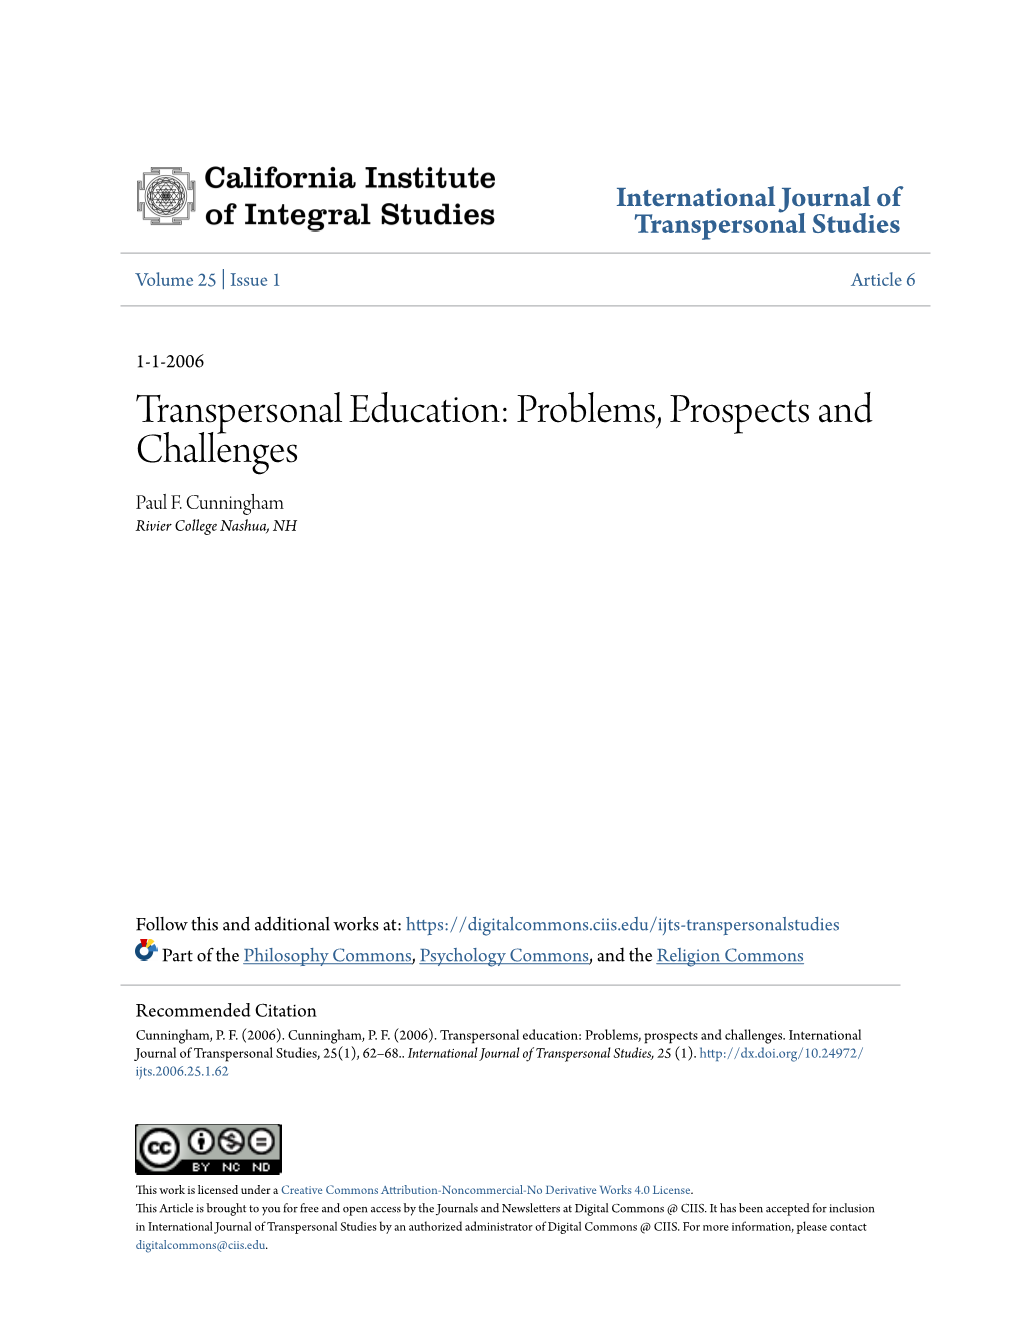 Transpersonal Education: Problems, Prospects and Challenges Paul F